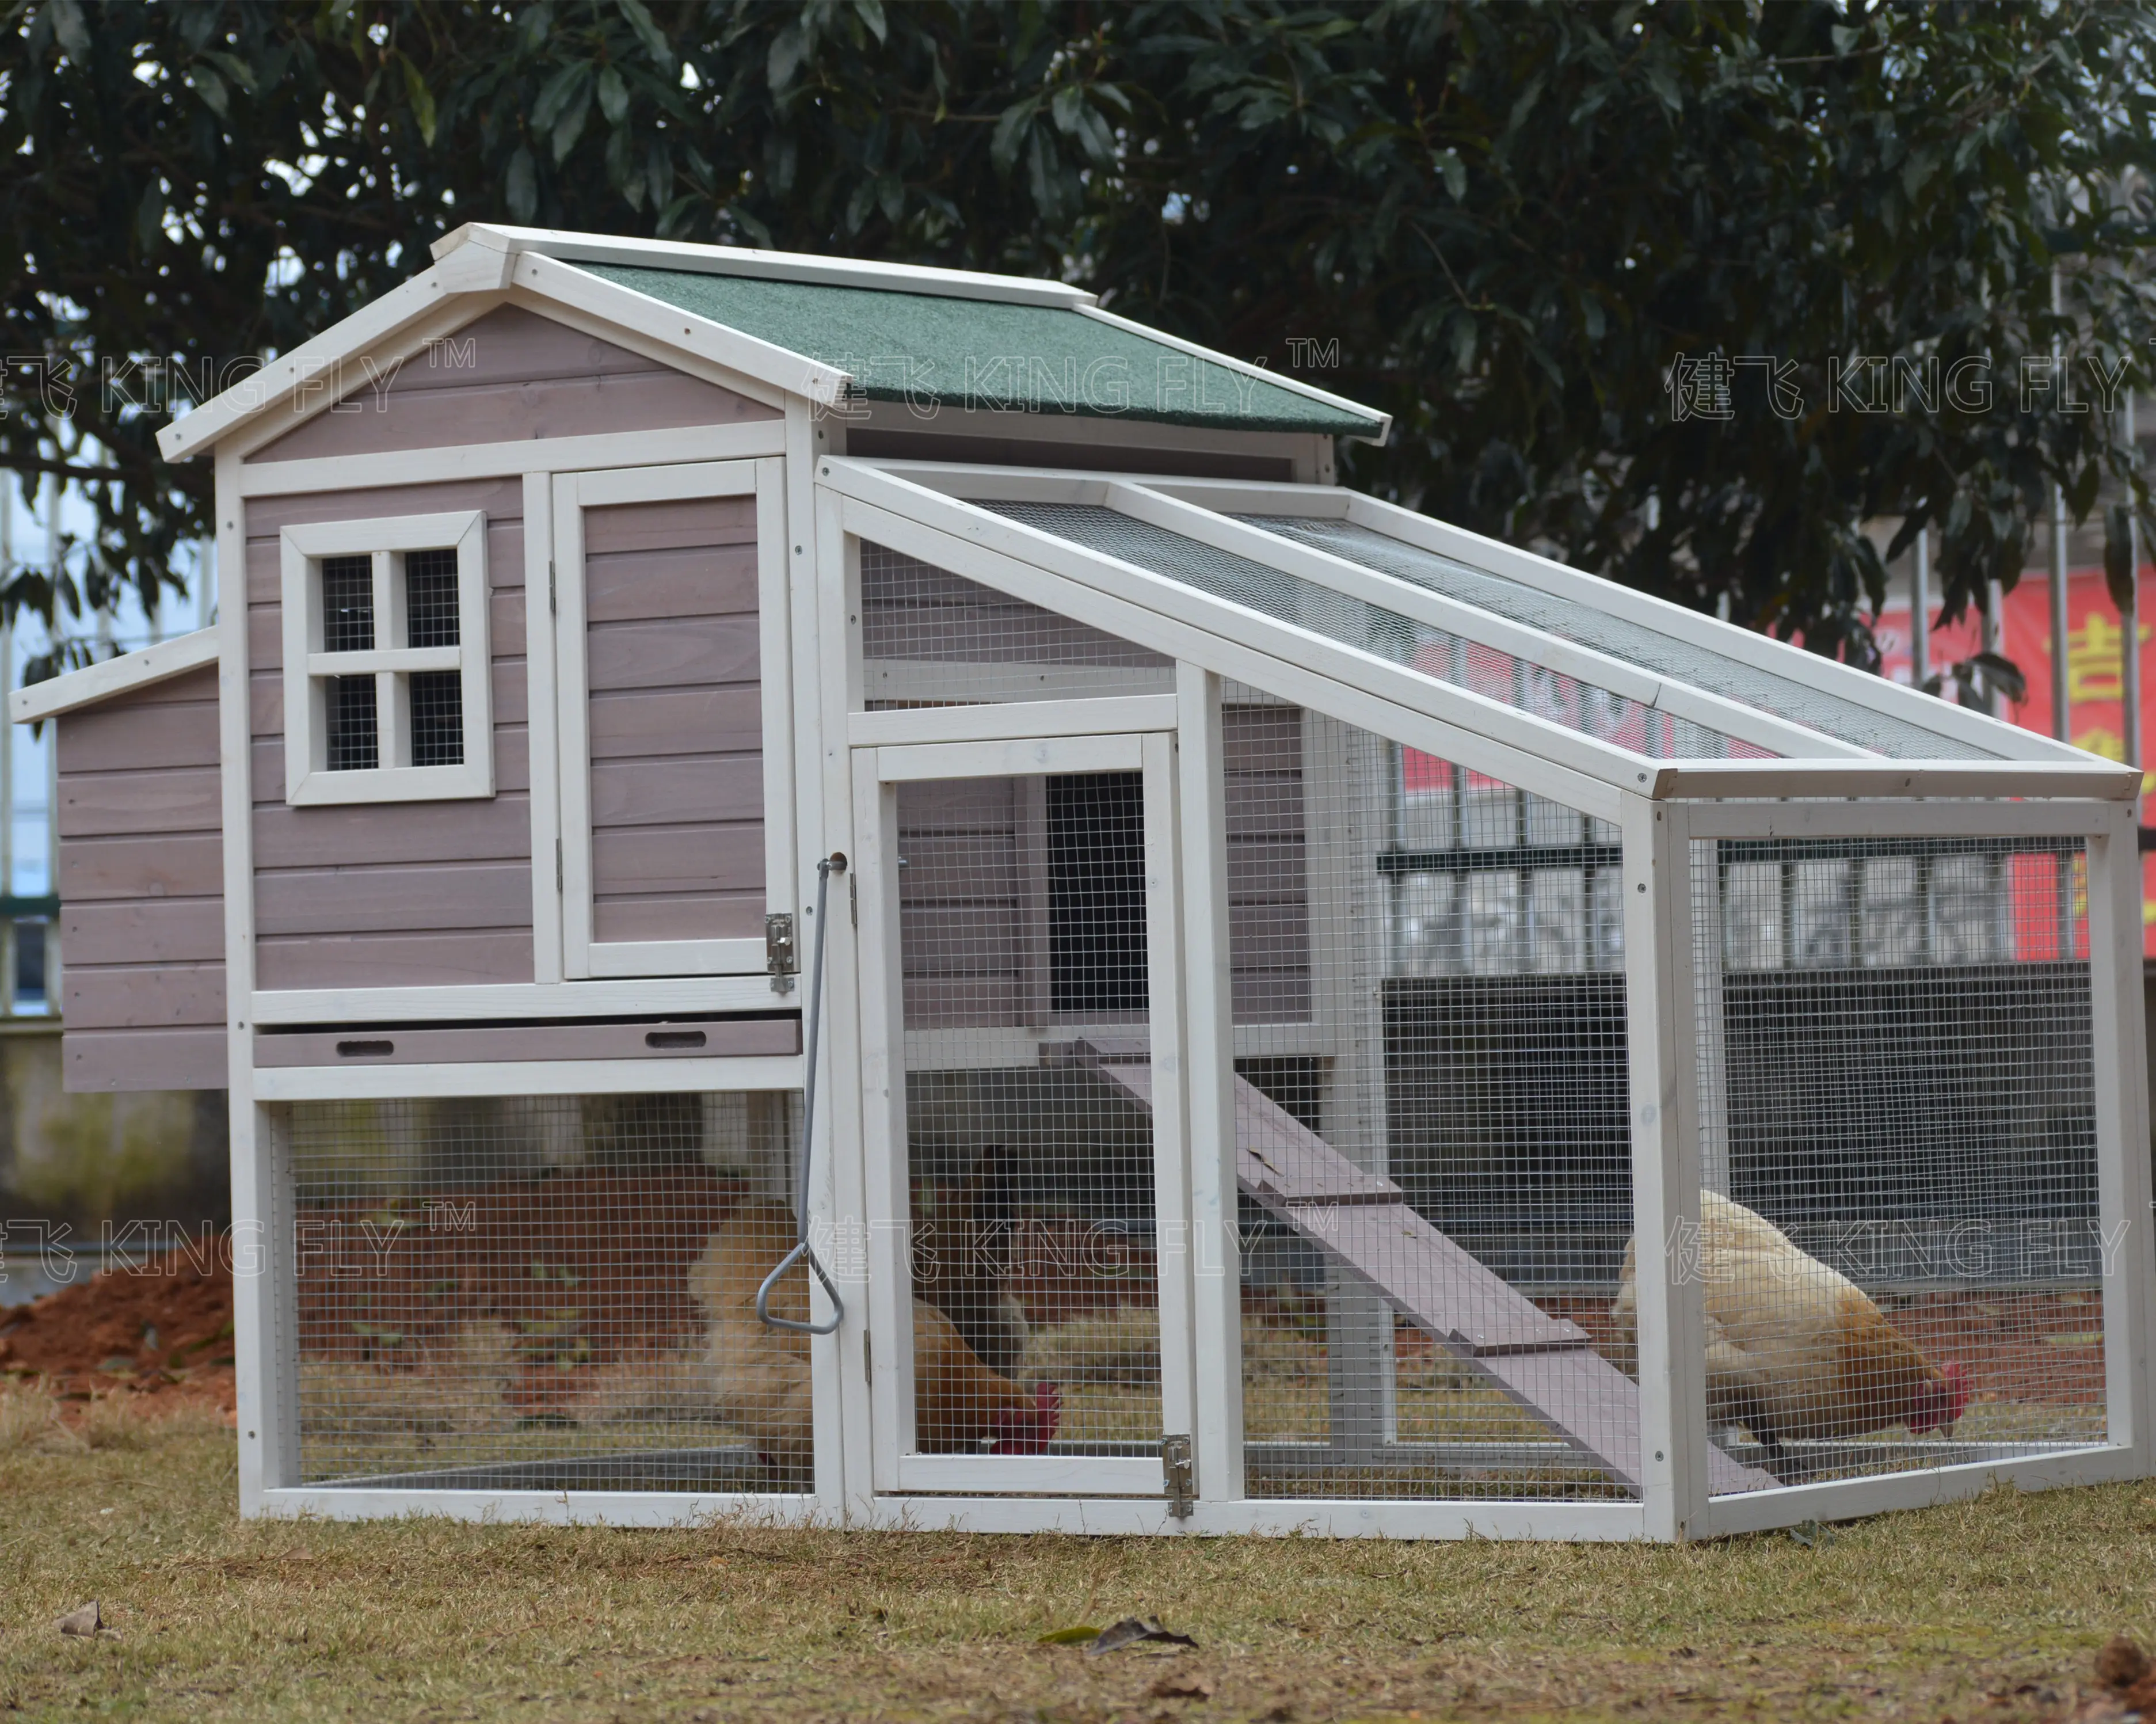 Opening Asphalt Roof Automatic Chicken Cage with Extra Run